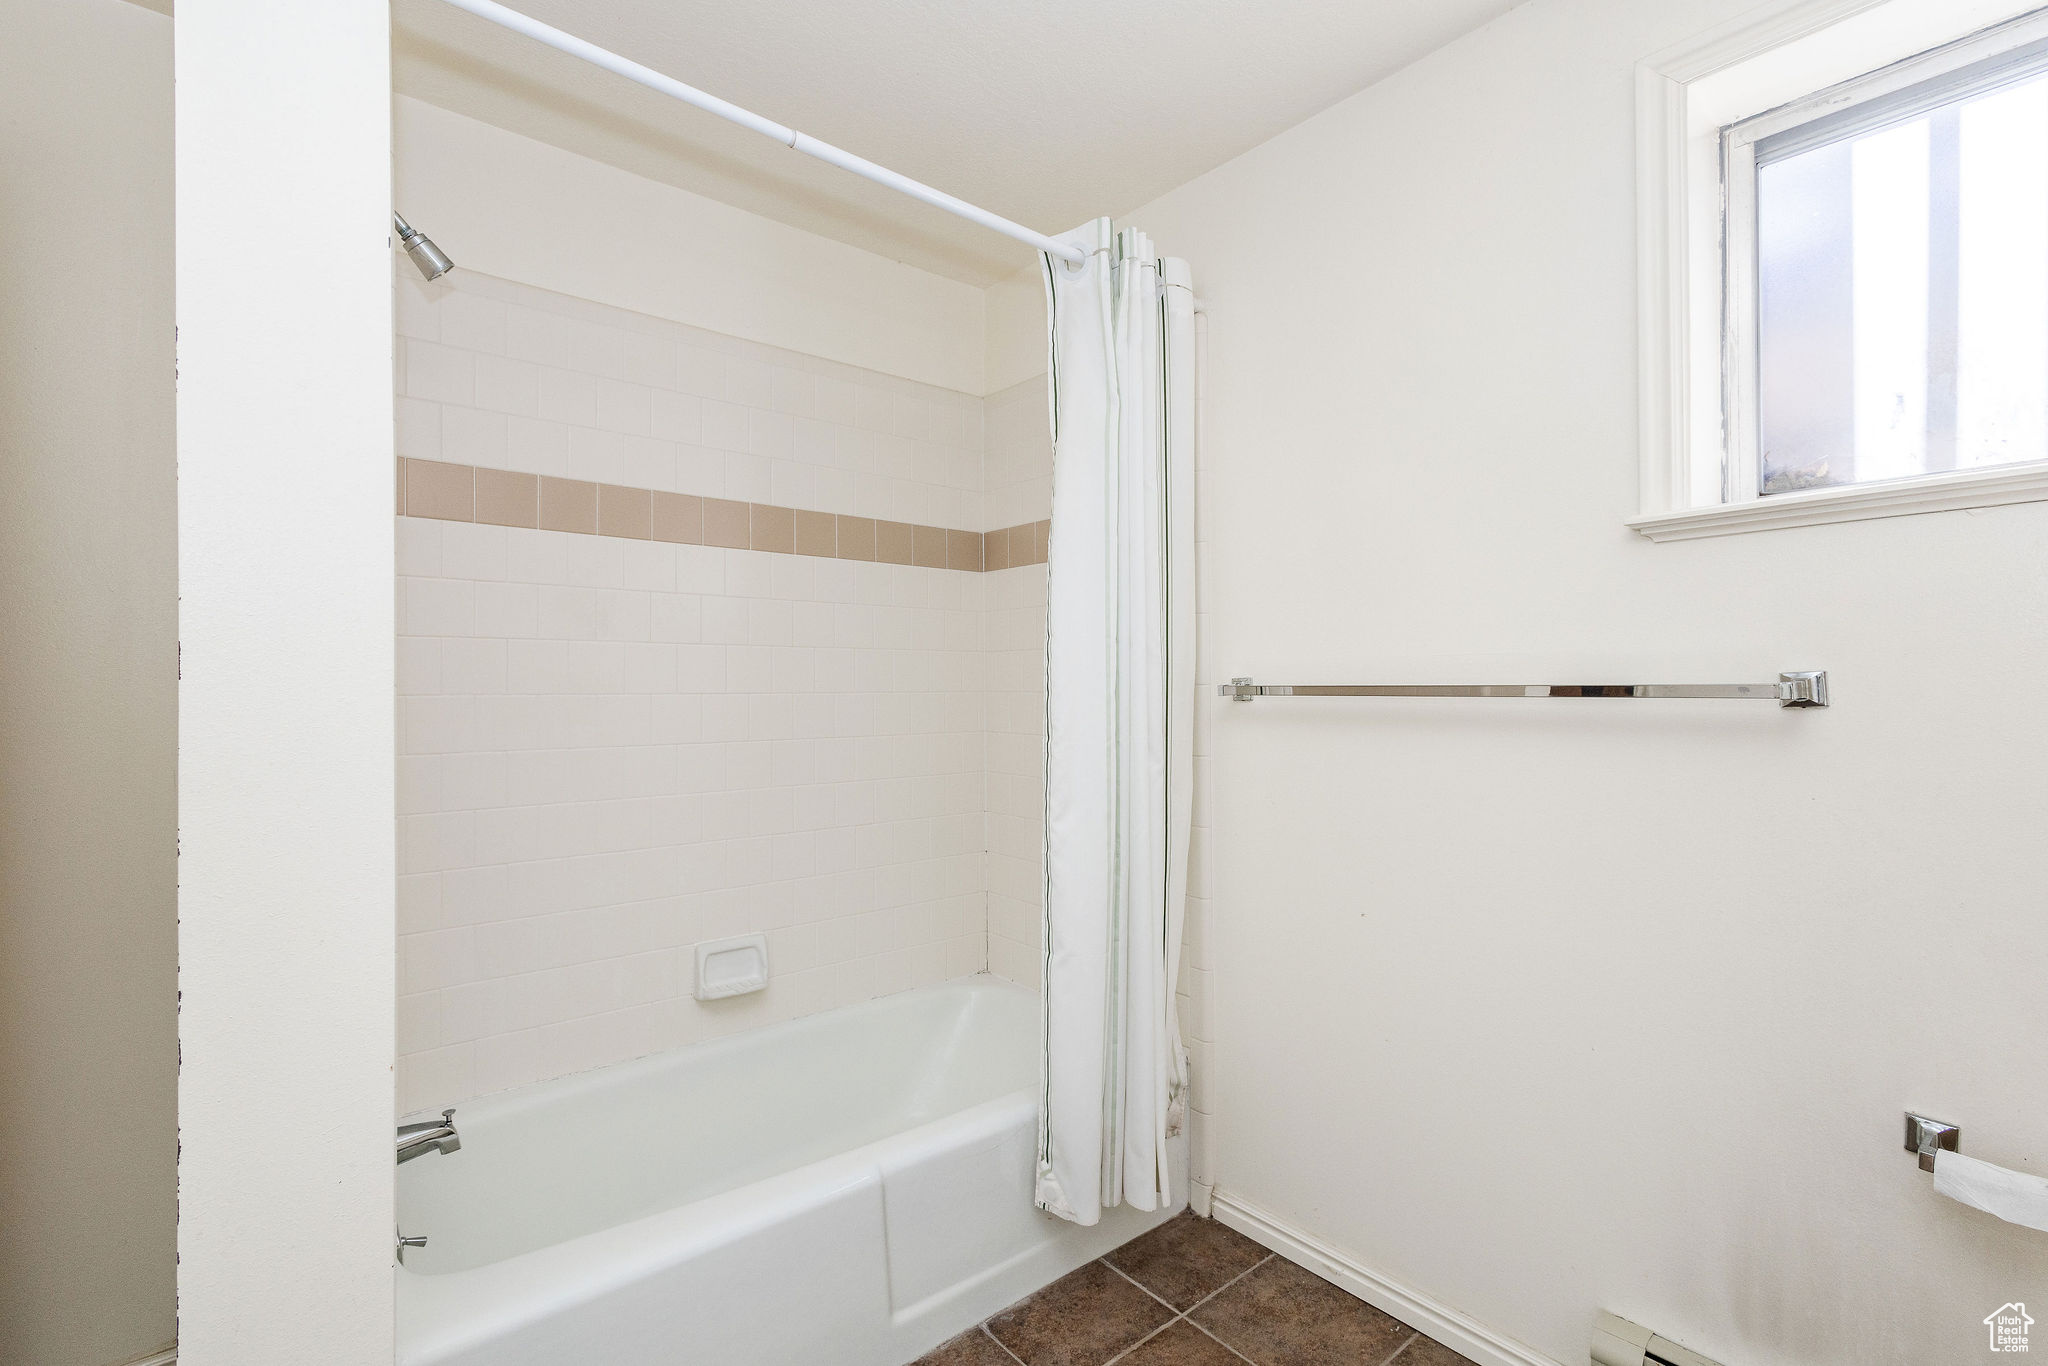 Bathroom featuring baseboard heating, tile floors, and shower / tub combo with curtain